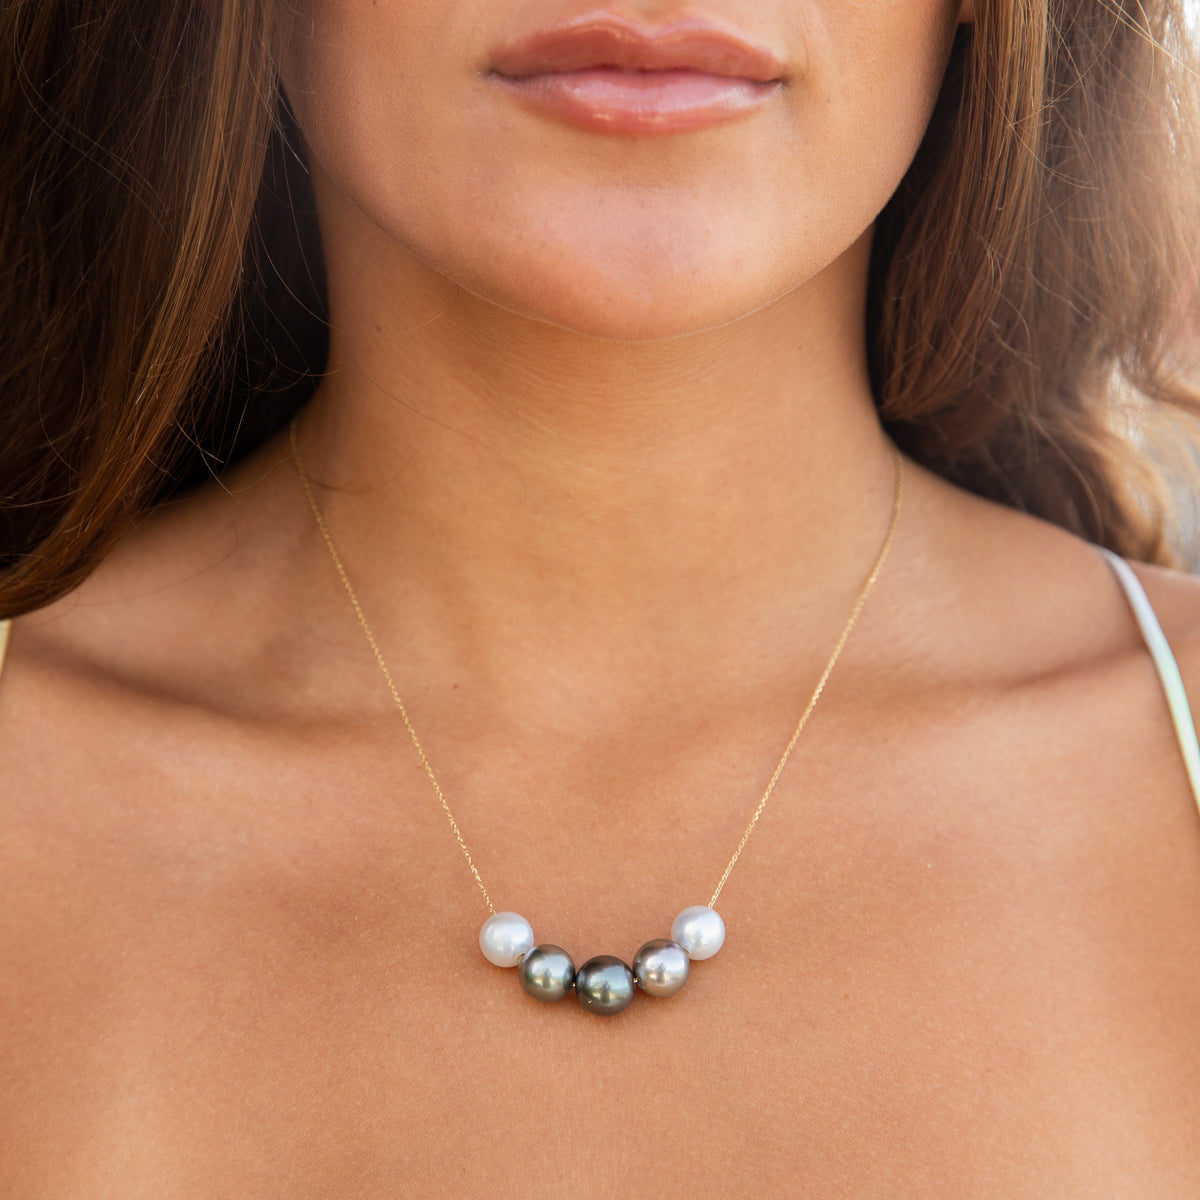 Ombré Tahitian and Akoya pearl necklace